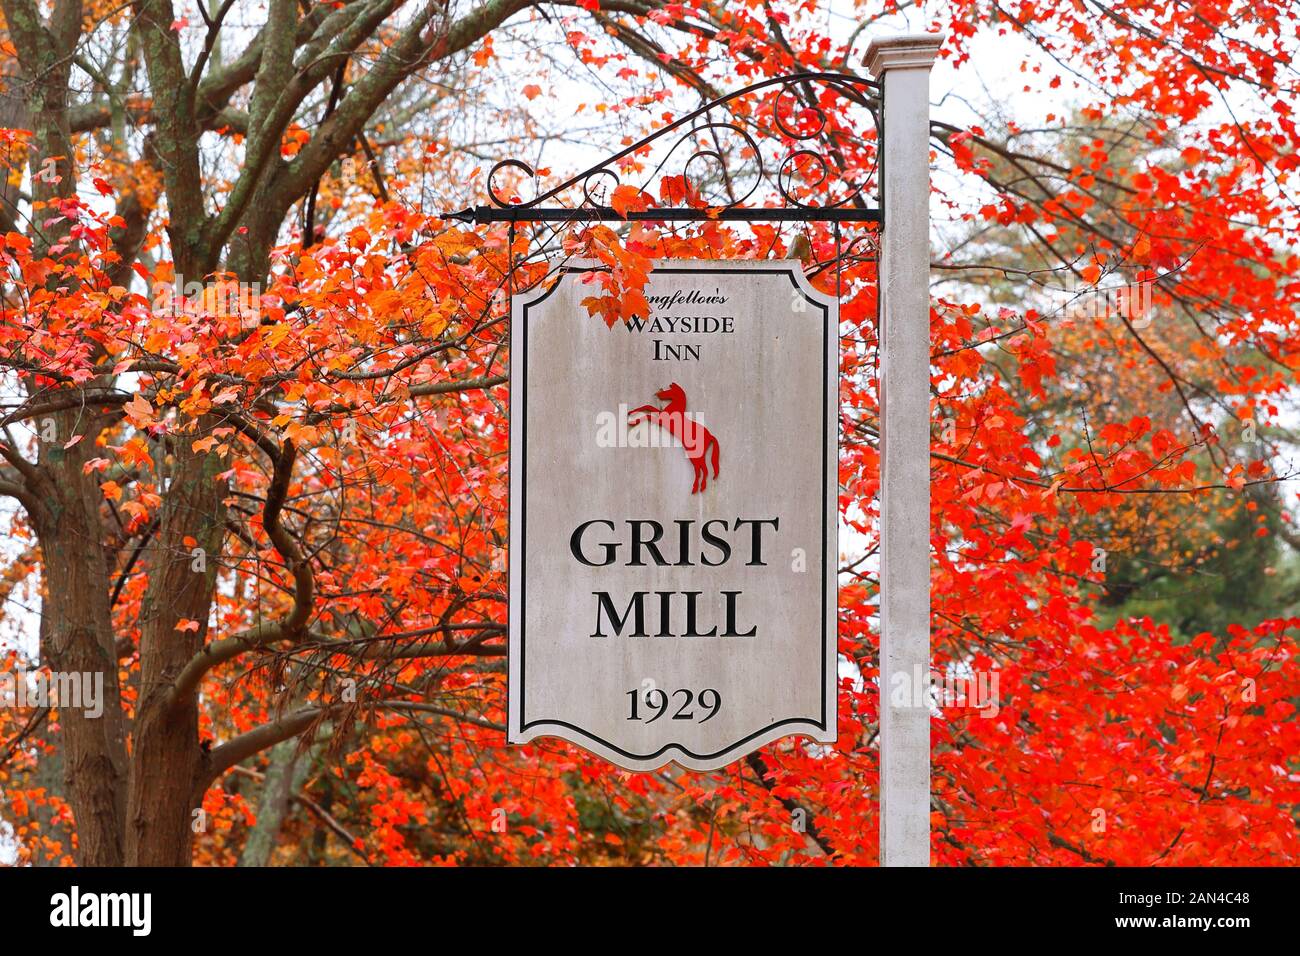 The sign of The Wayside Inn Grist Mill in Autumn. Stock Photo